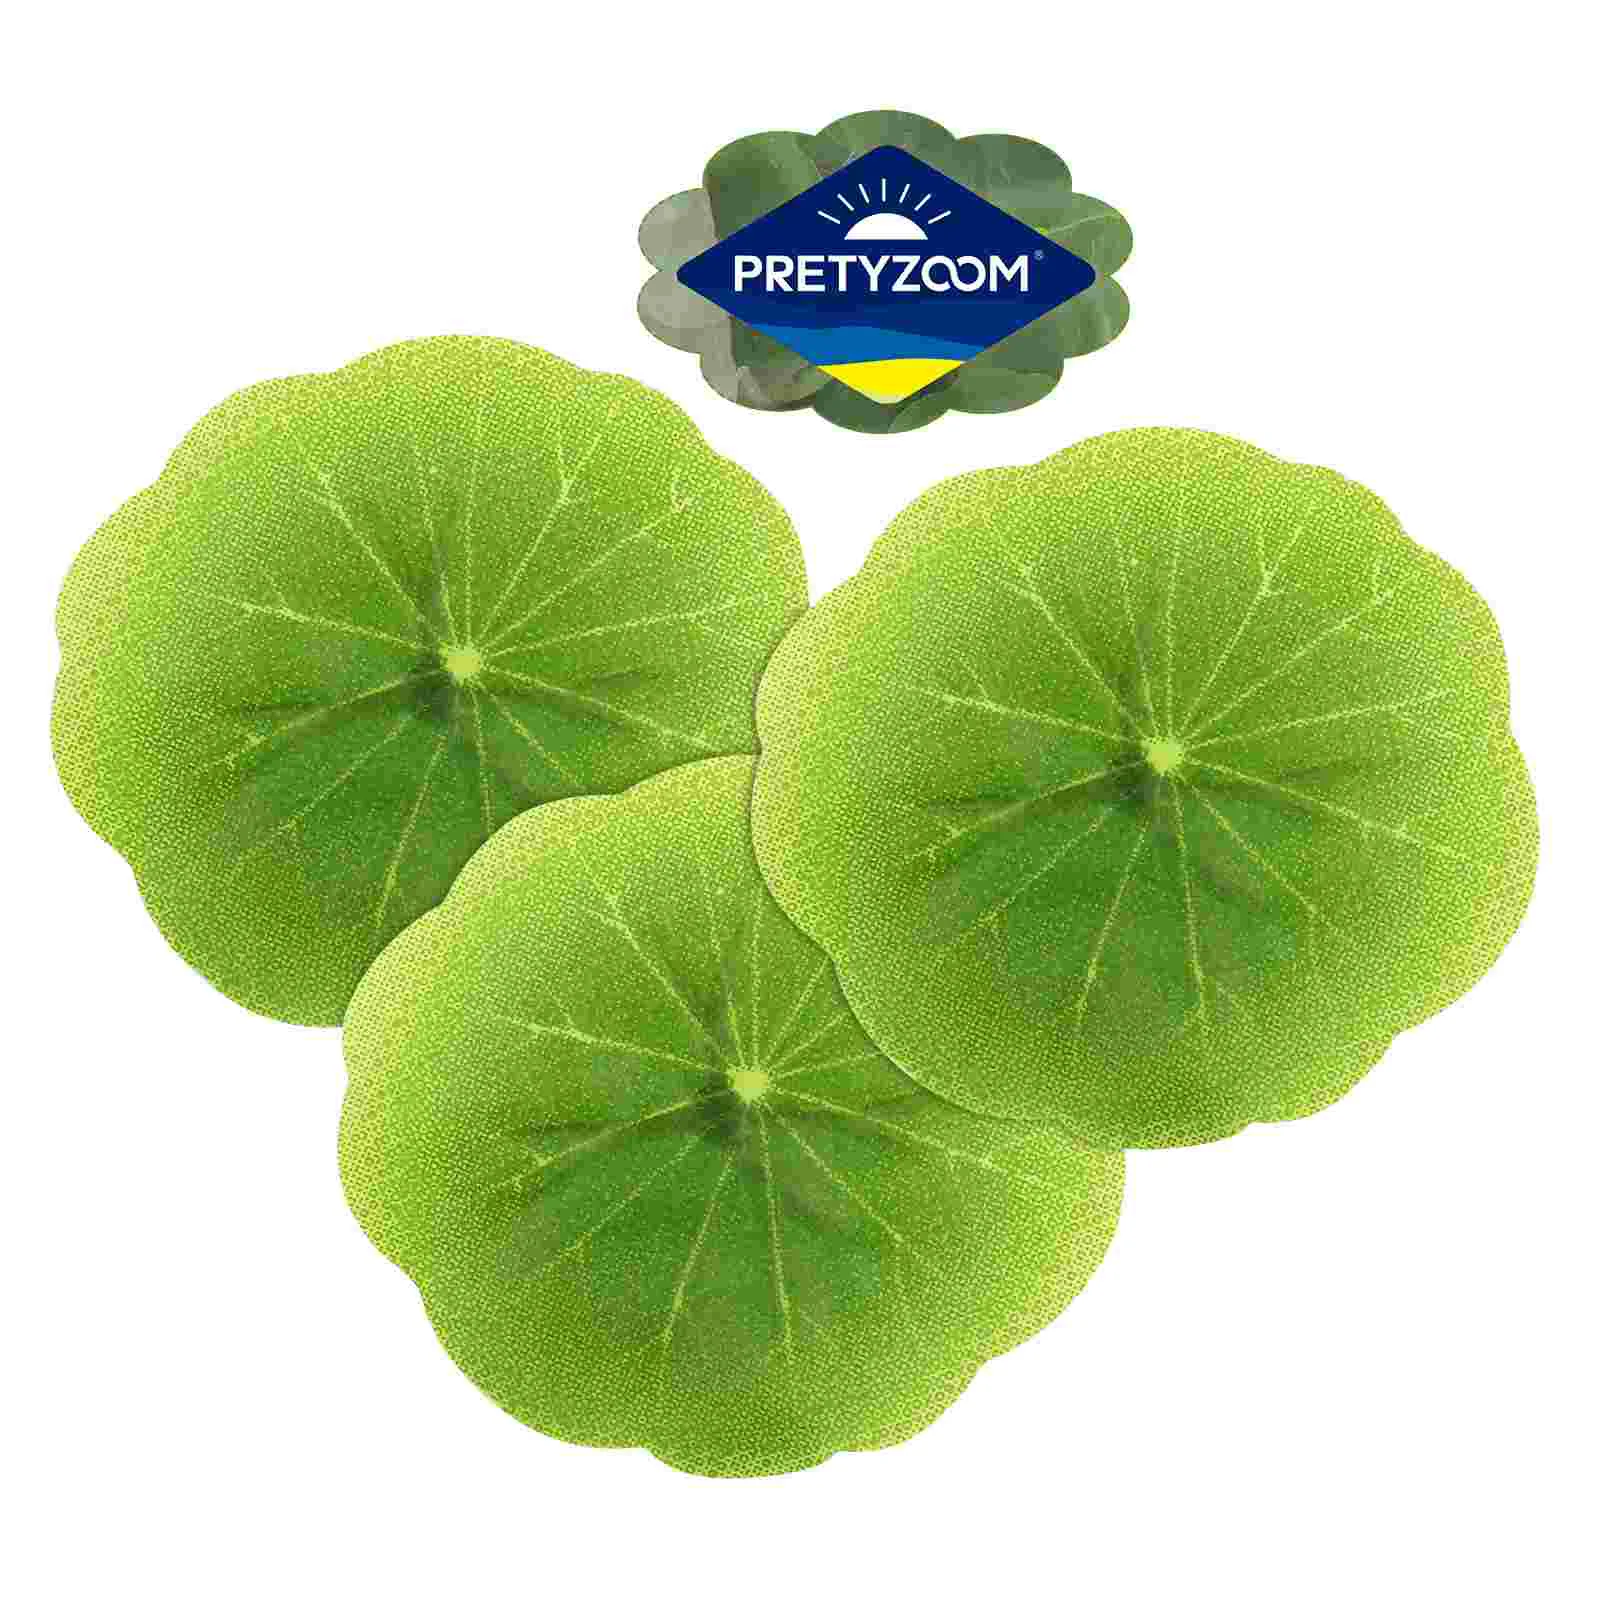 

30 Pcs Lily Pads for Ponds Fake Artificial Lotus Leaves Plants Leaf Fish Tank Decorations